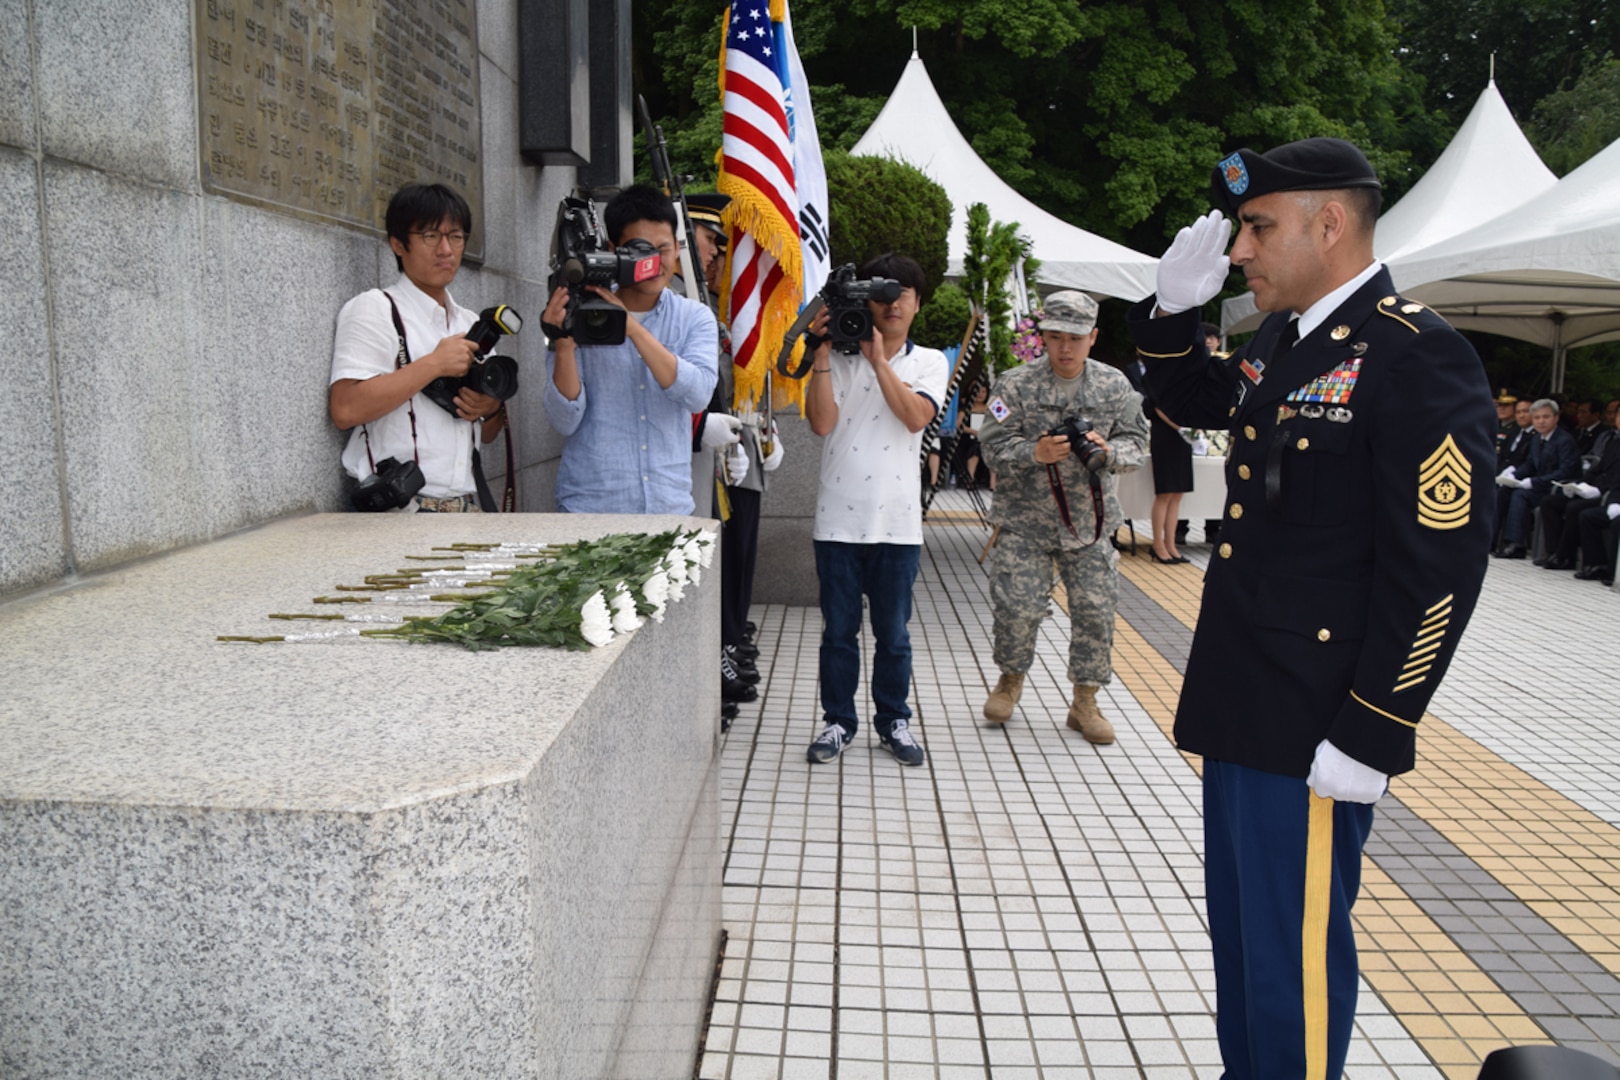 OSAN AIR BASE, South Korea (July 2, 2015)  - Staff Sgt. Heather A. Denby, 35th ADA Public AffairsCommand Sgt. Maj. Jose Villarreal, senior enlisted advisor to the commander of 35th Air Defense Artillery Brigade, pays tribute to the men of Task Force Smith during a memorial ceremony at Jukmiryeong War monument. Nearly 40 percent of the Soldiers who served in Task Force Smith lost their lives during the Battle of Osan. 